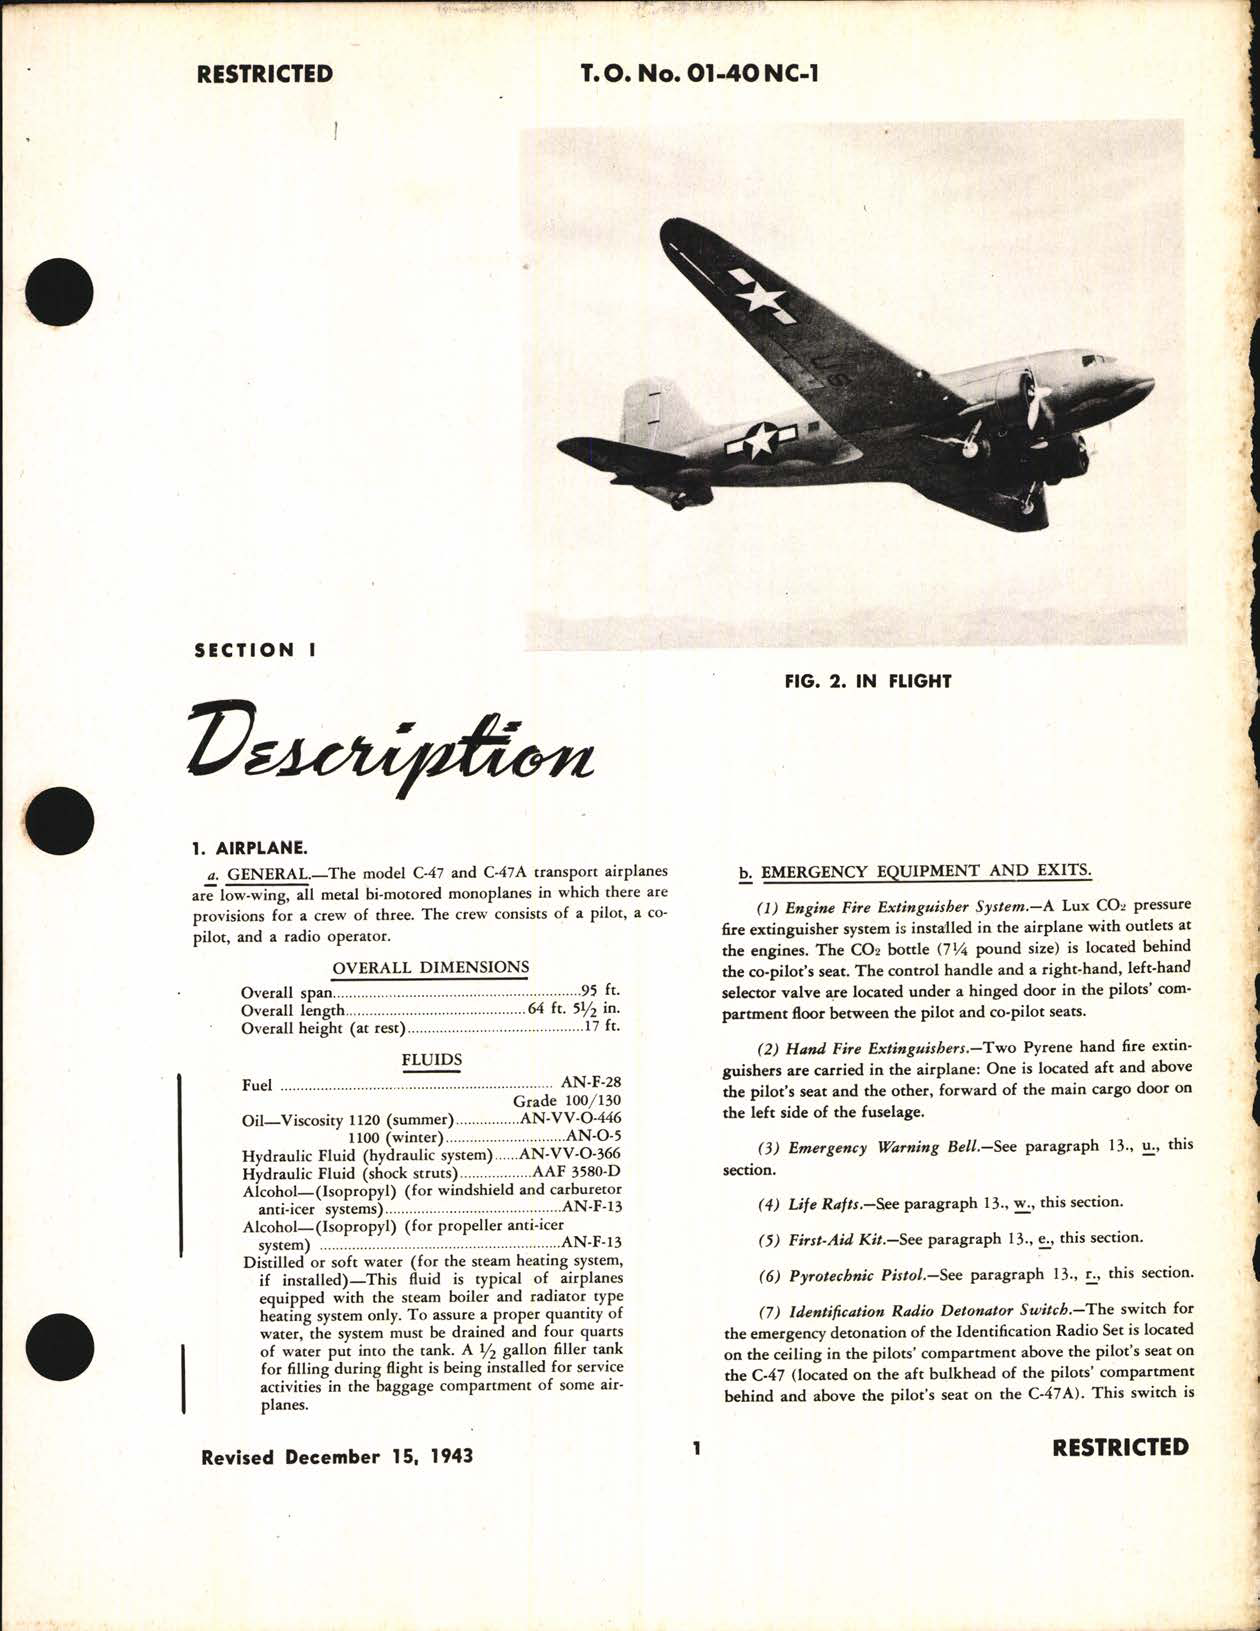 Sample page 5 from AirCorps Library document: Pilot's Flight Operating Instructions for C-47, C-47A, C-47B, R4D-1, R4D-5, and R4D-6